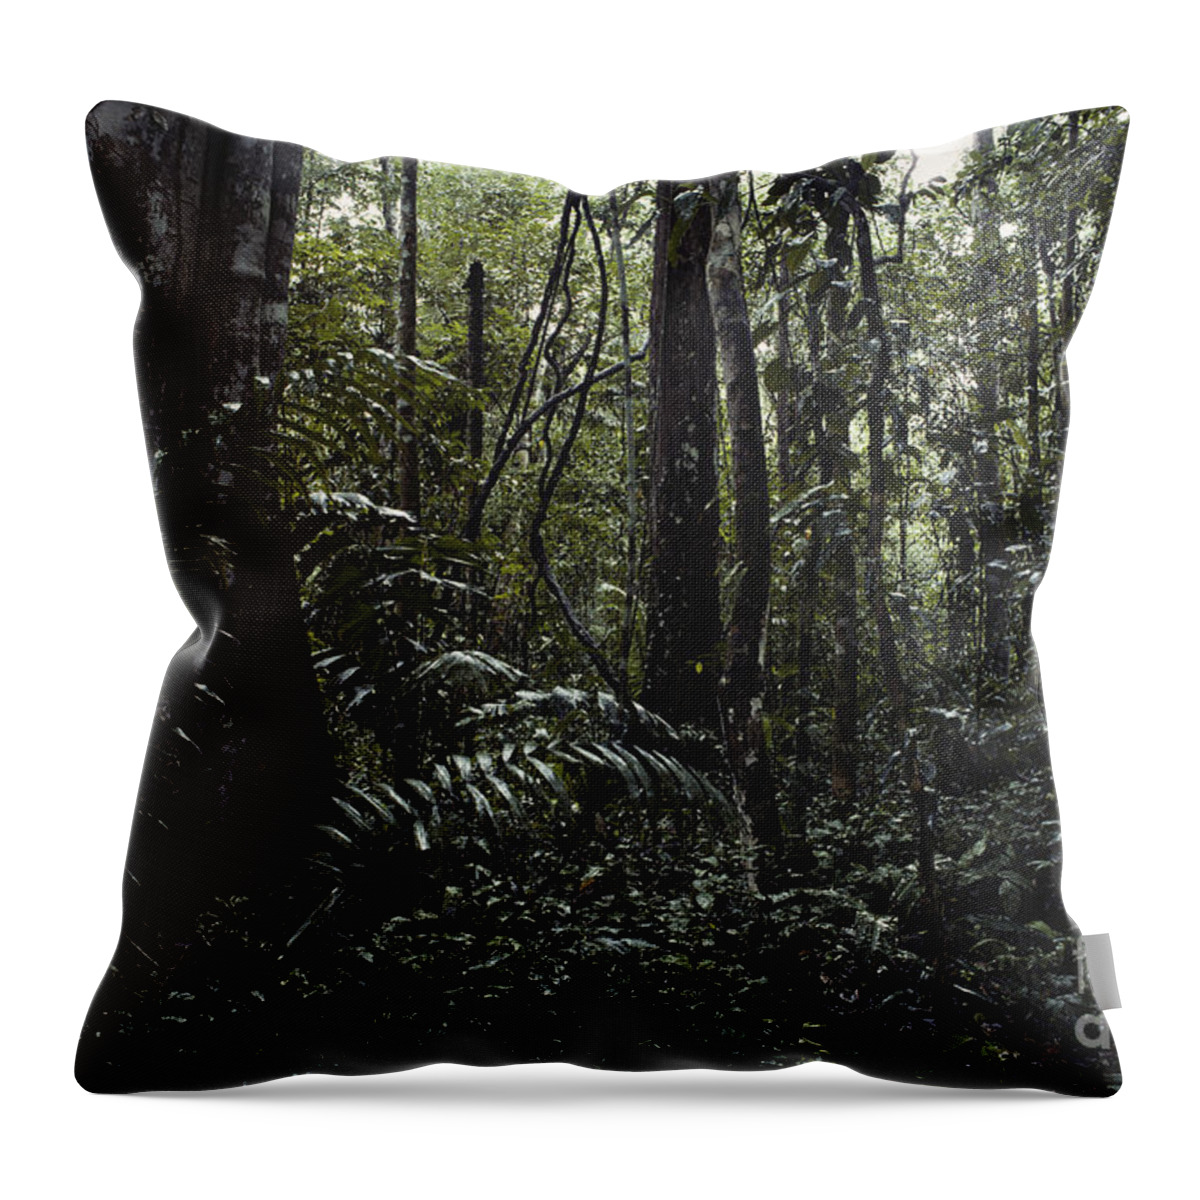 Tropical Rainforest Throw Pillow featuring the photograph Peruvian Amazon #2 by Gregory G. Dimijian, M.D.